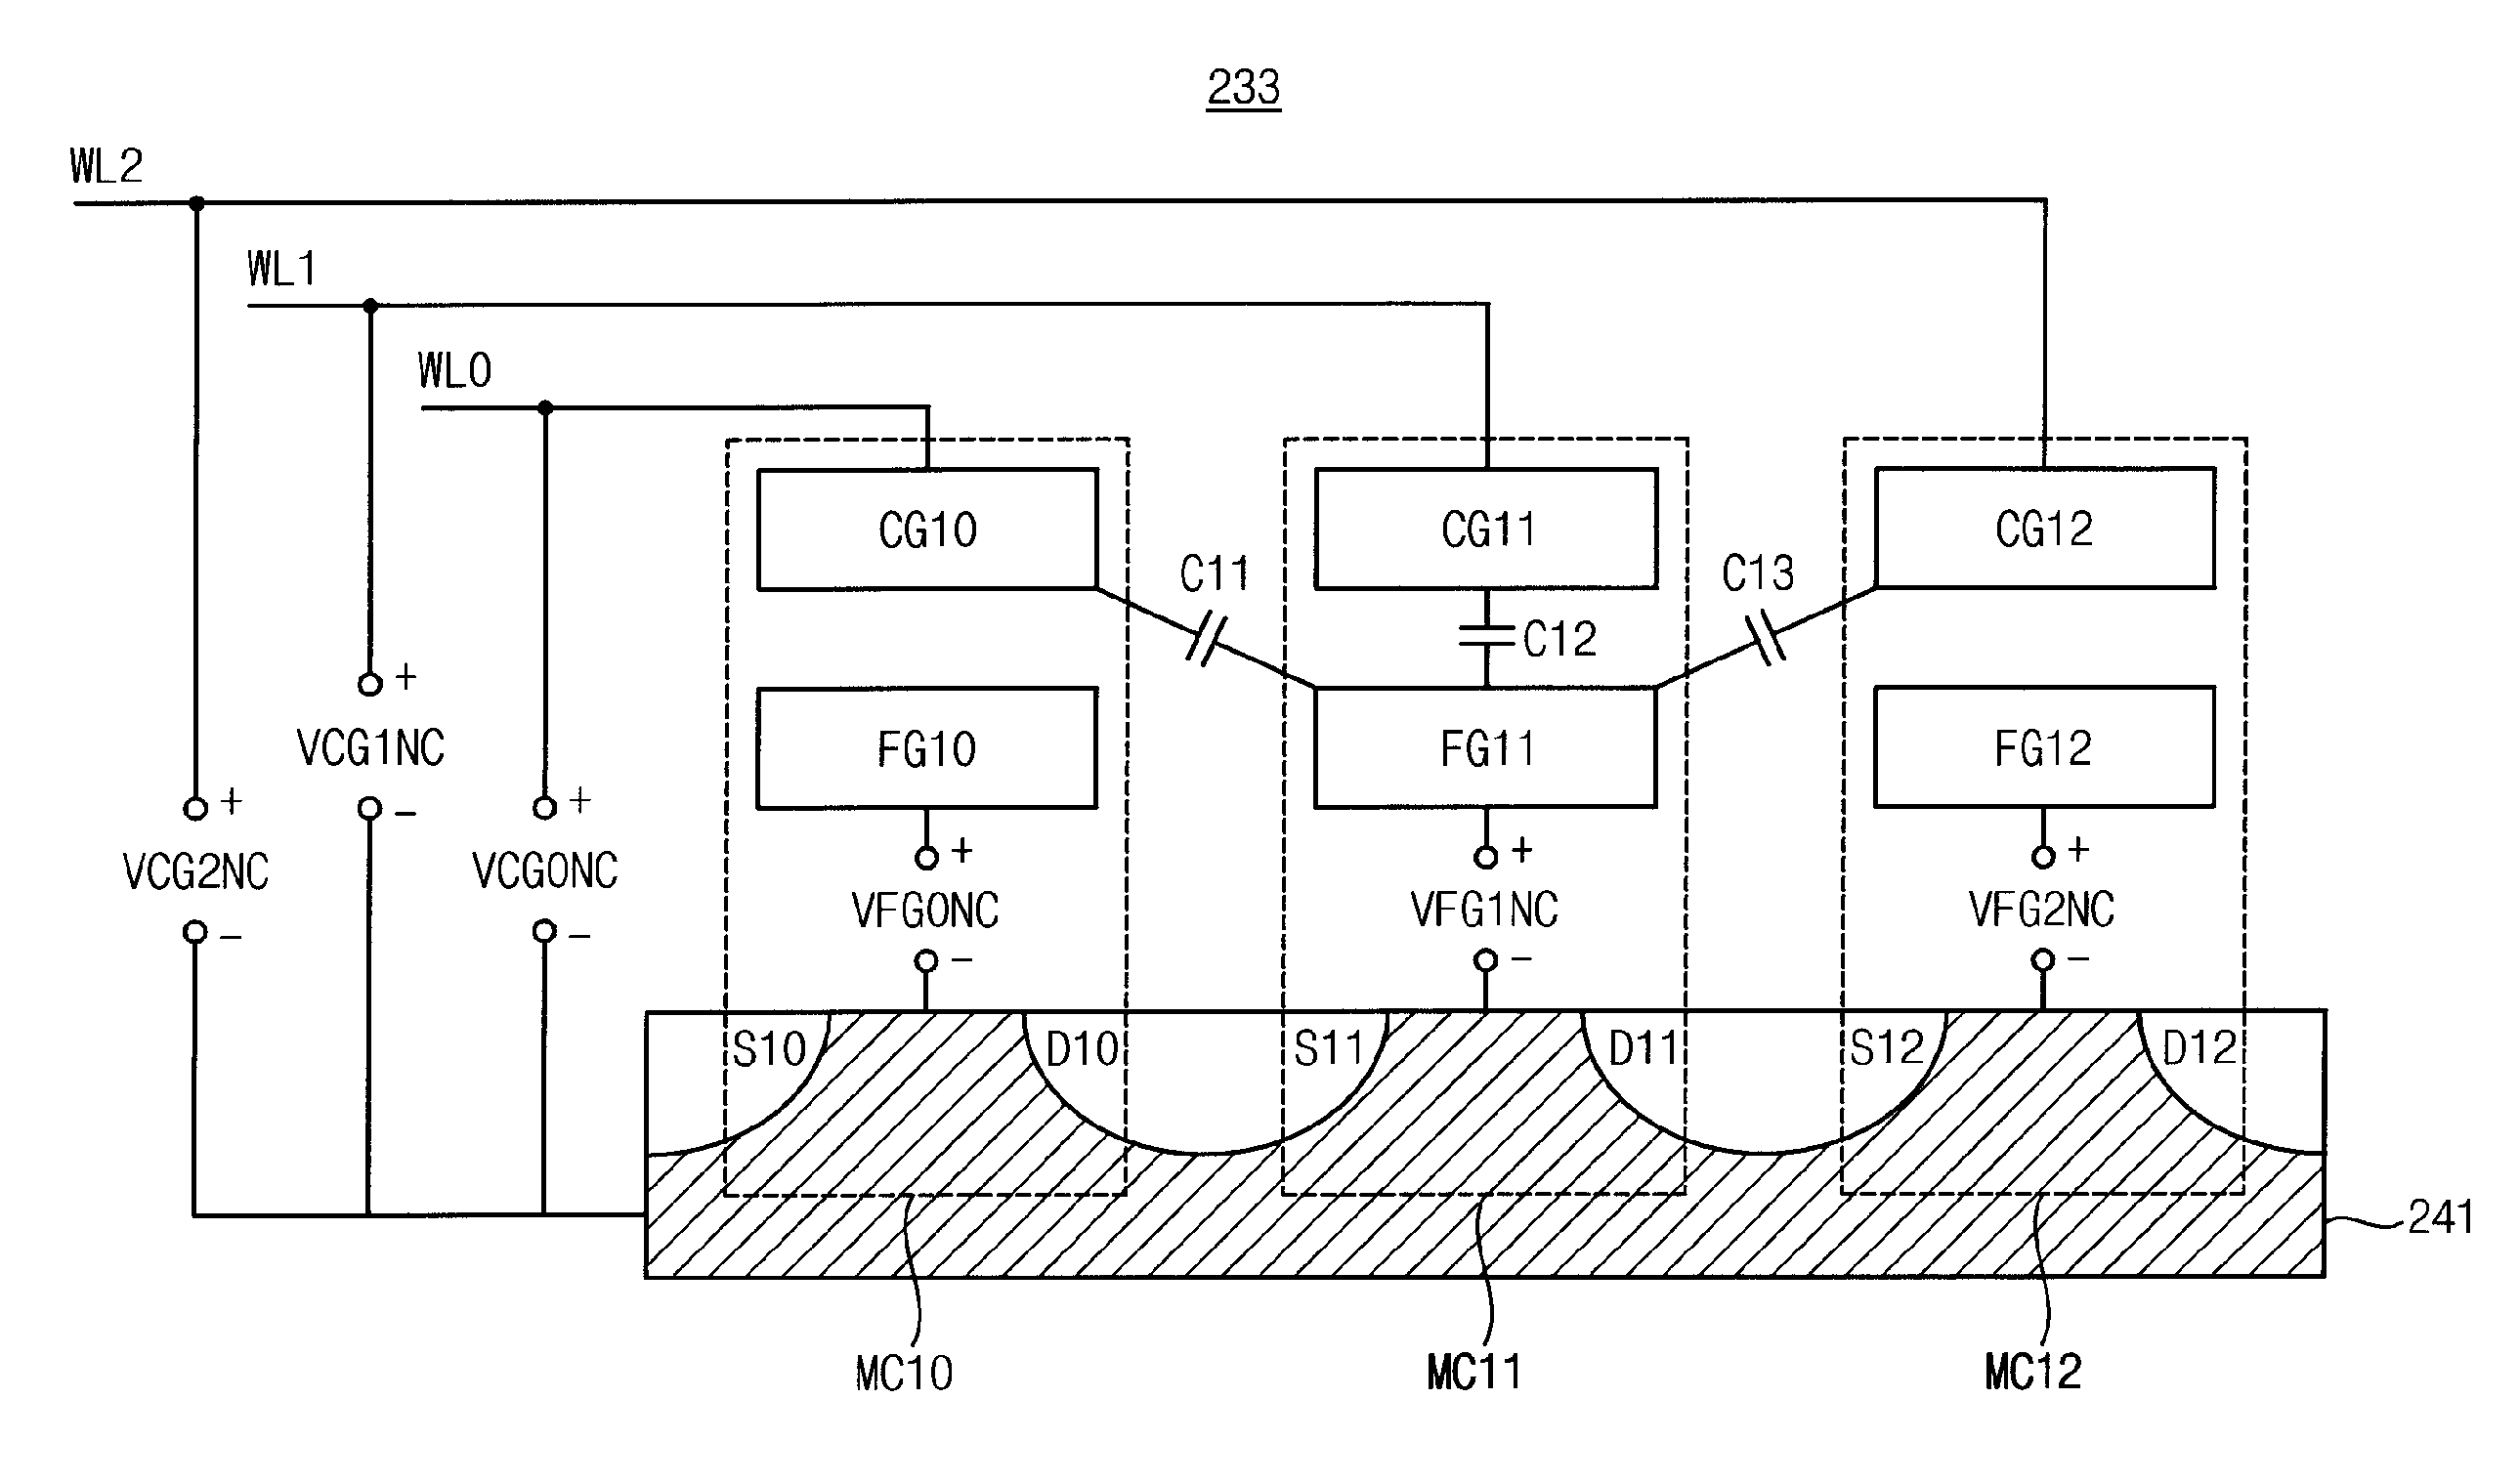 Non-volatile memory device and method of programming the same